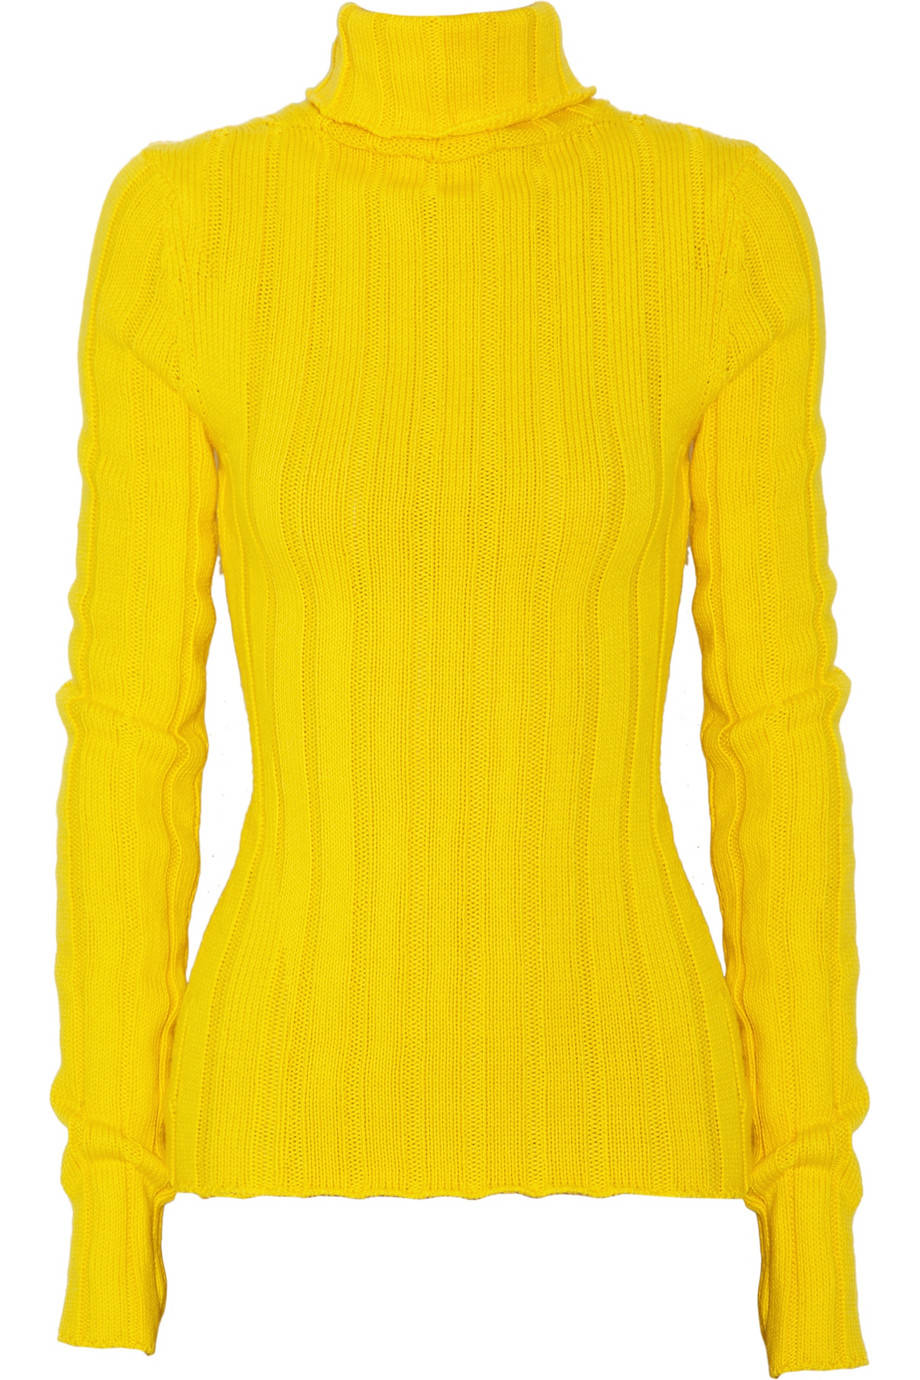 D&g Spring 2012 Yellow Ribbed Turtleneck in Yellow | Lyst